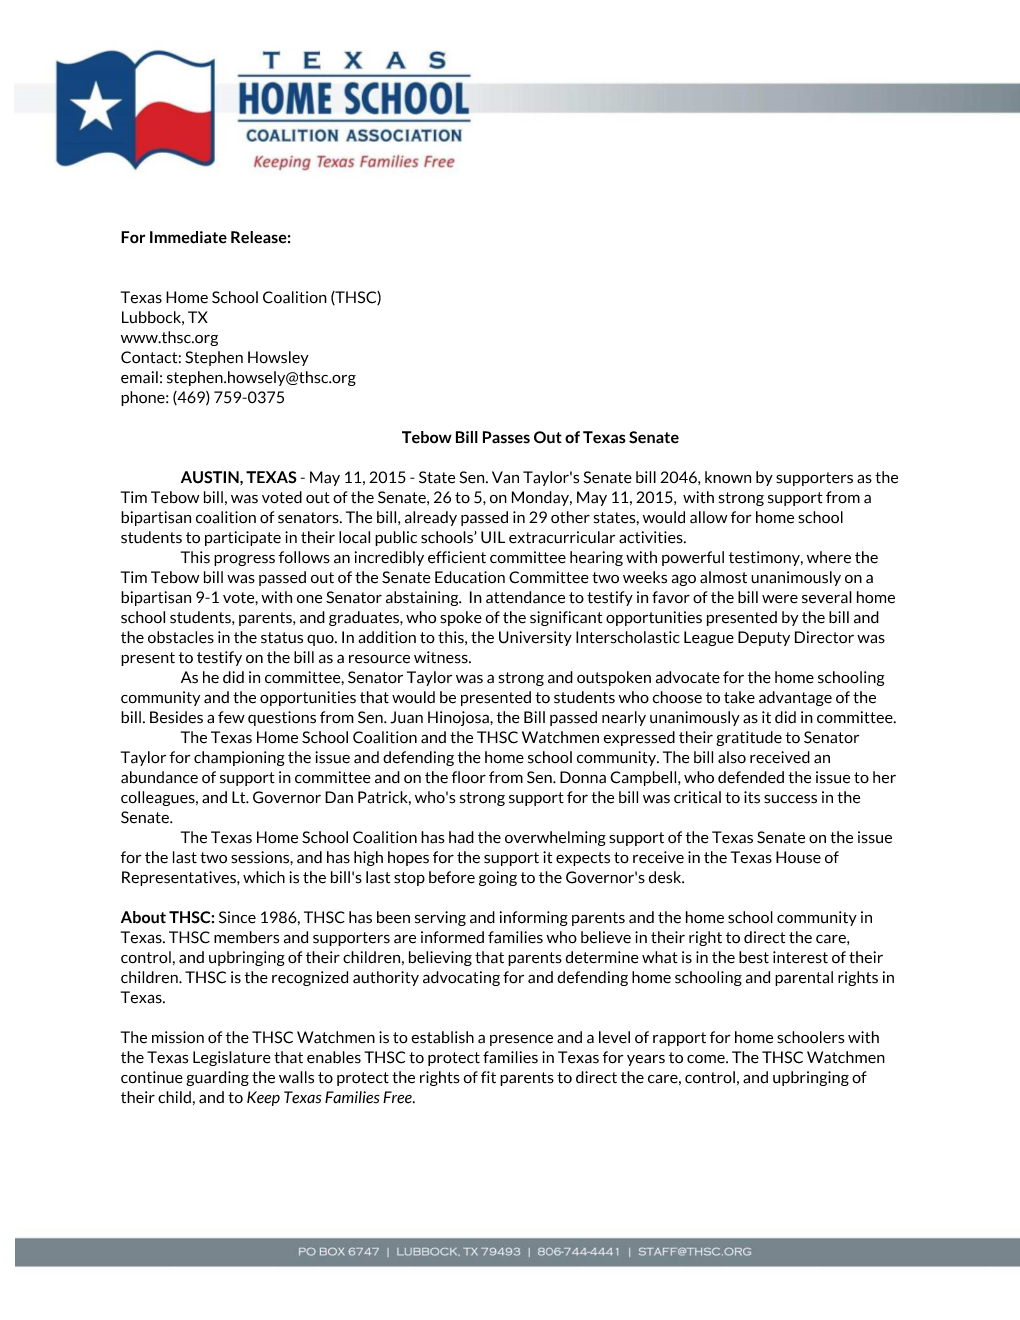 For Immediate Release: Texas Home School Coalition (THSC